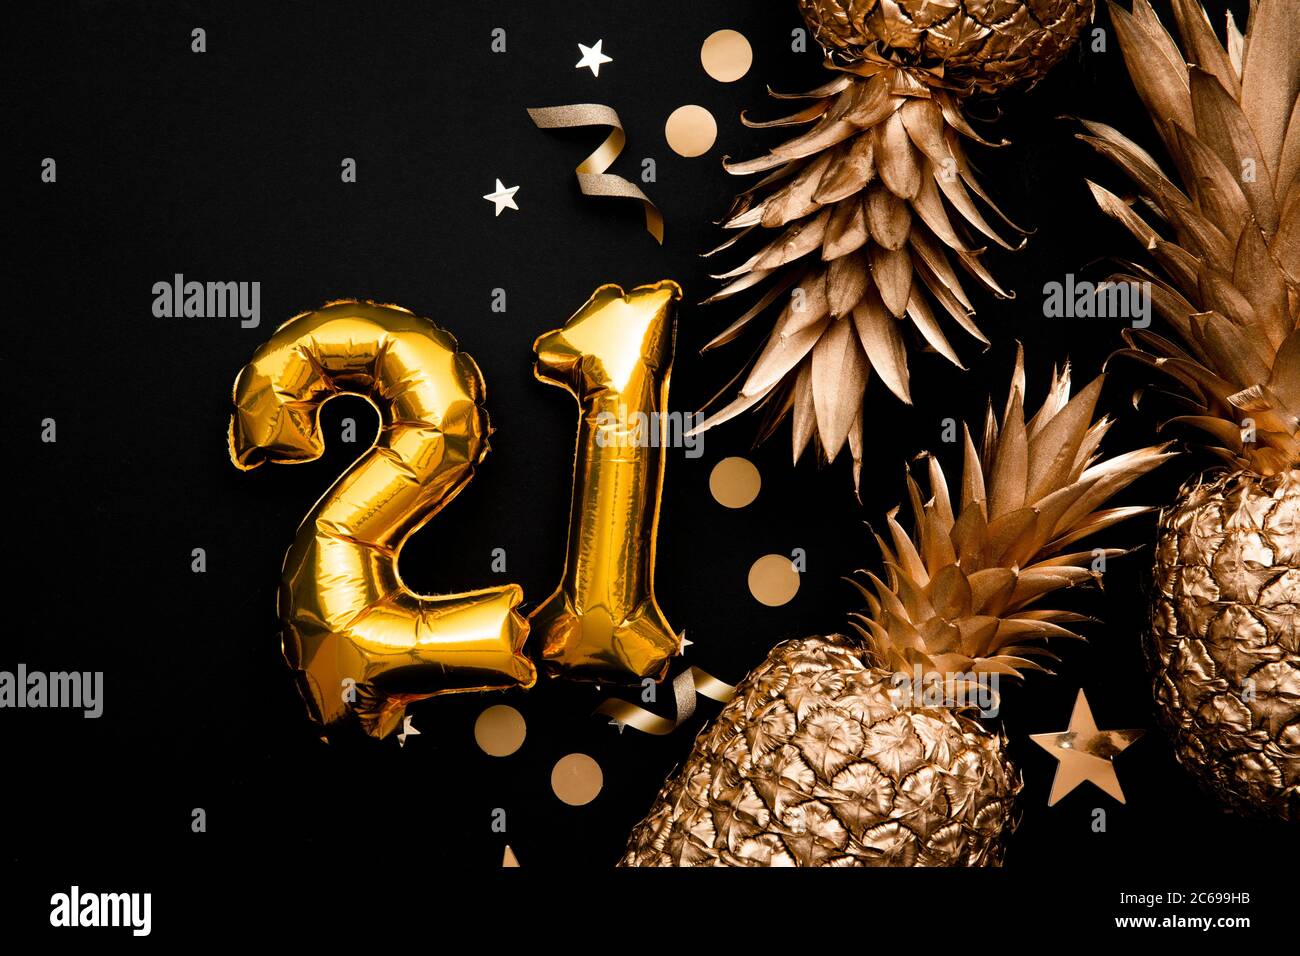 21st birthday celebration background with gold balloons and golden pineapples Stock Photo